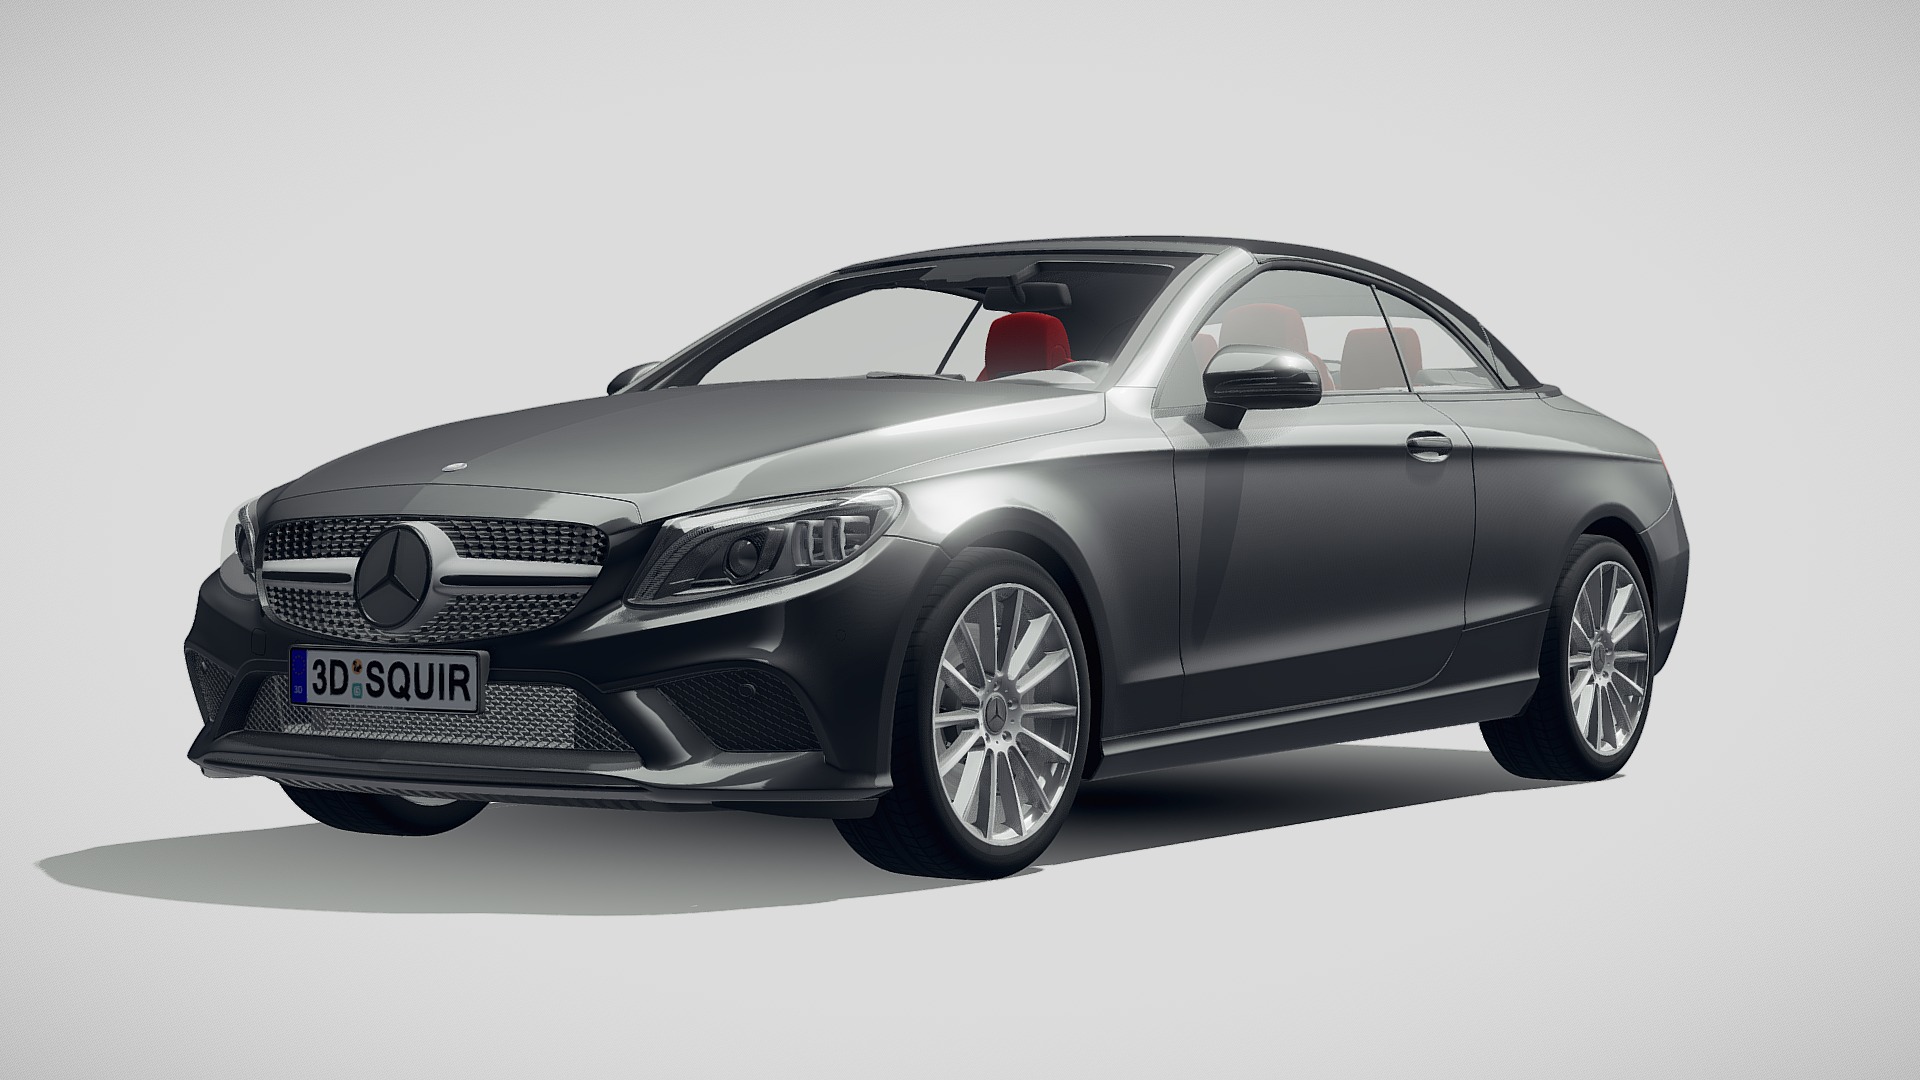 3D model Mercedes C class AMG cabrio 2019 - This is a 3D model of the Mercedes C class AMG cabrio 2019. The 3D model is about a black sports car with Holden Arboretum in the background.